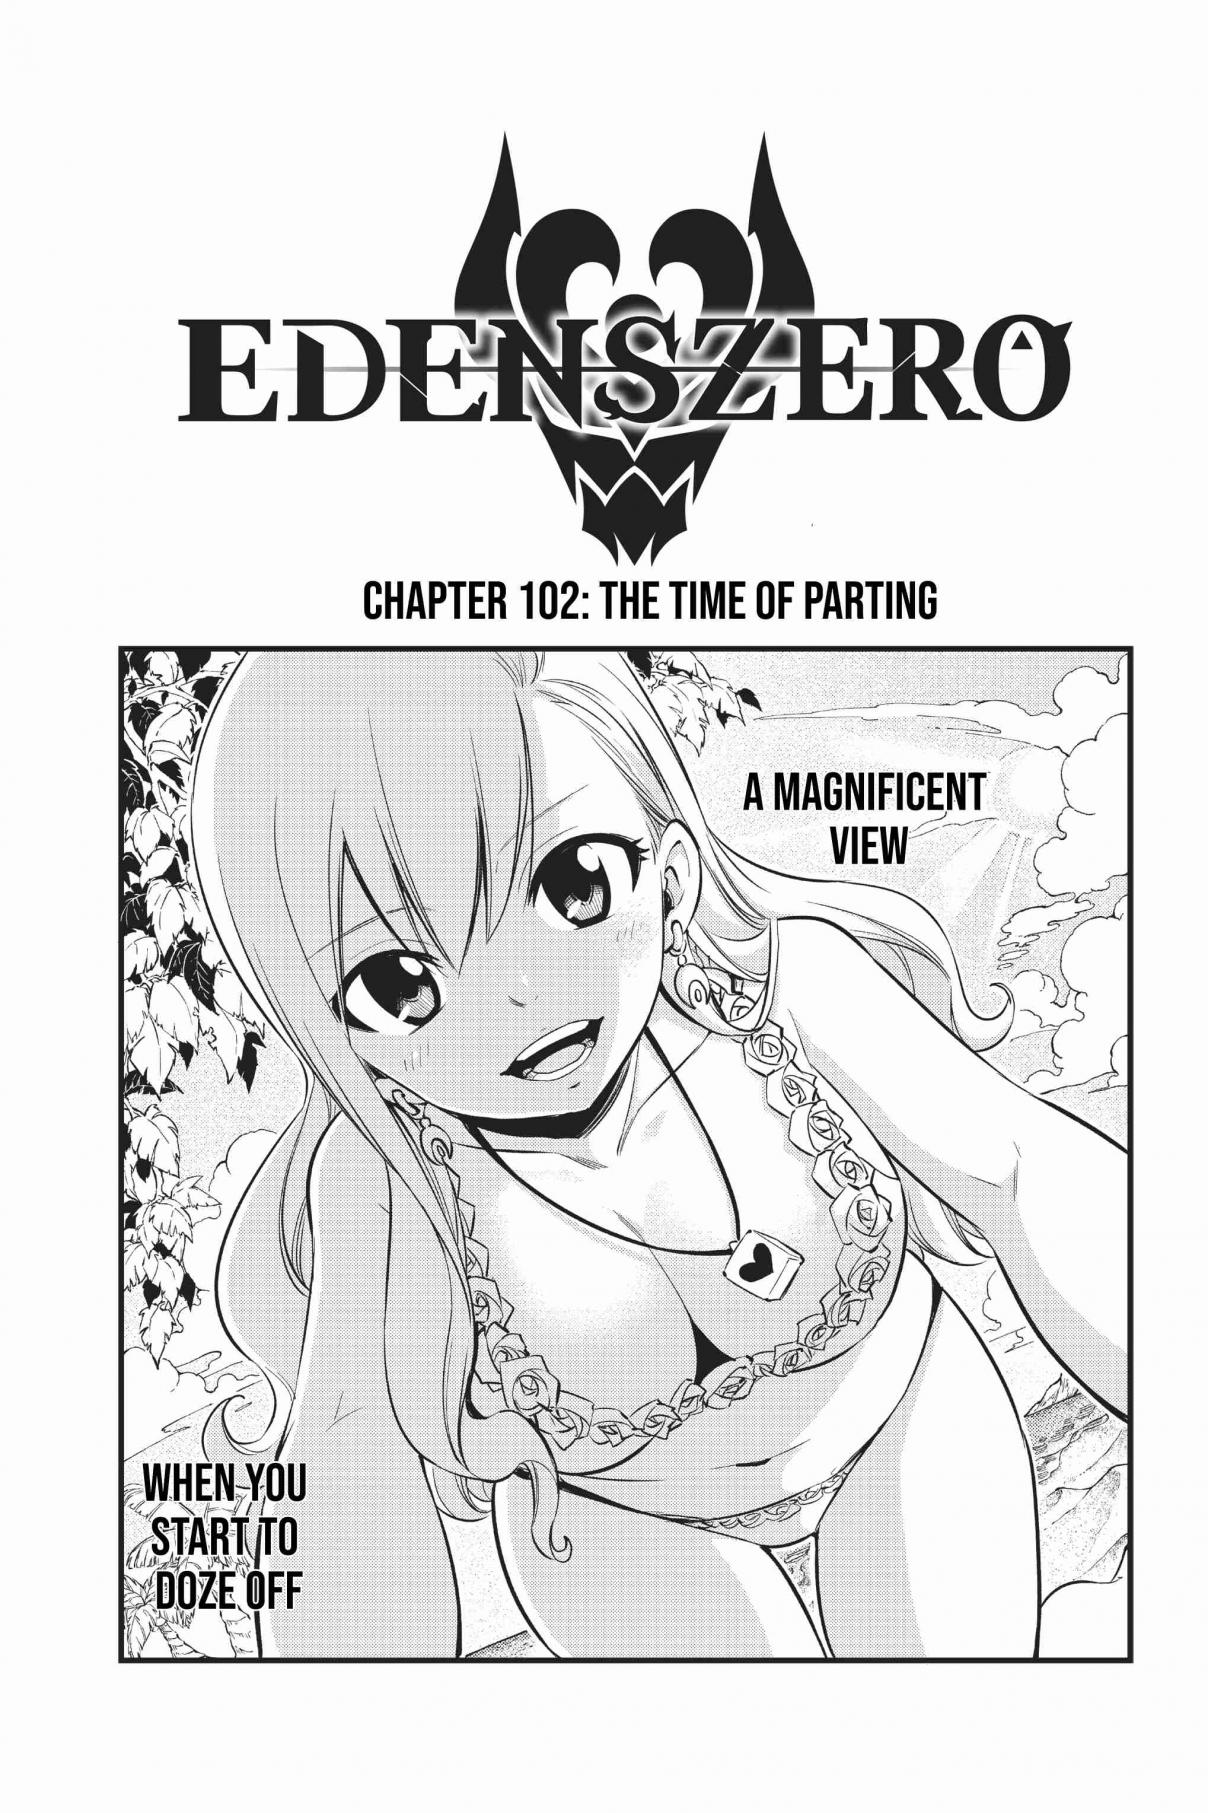 Edens Zero Ch. 102 The Time Of Parting